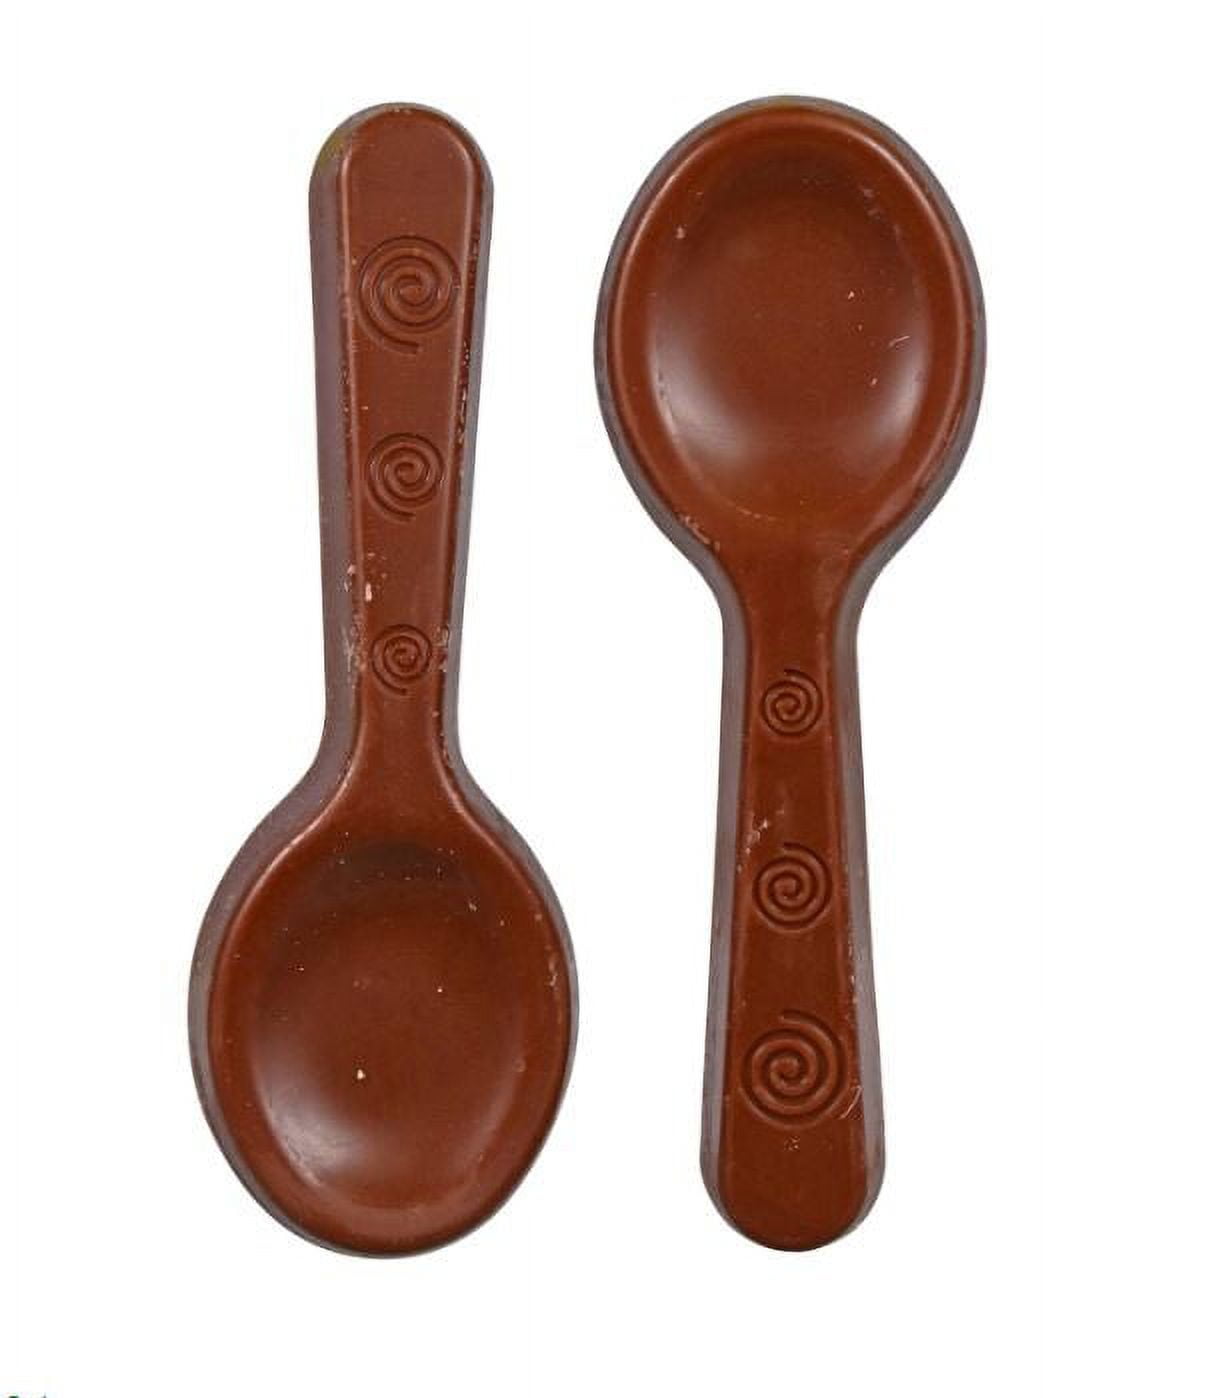 Hot Chocolate Spoons Making Supplies, 50 Pcs Disposable Wooden Spoon for  Hot Cocoa Candy Baking